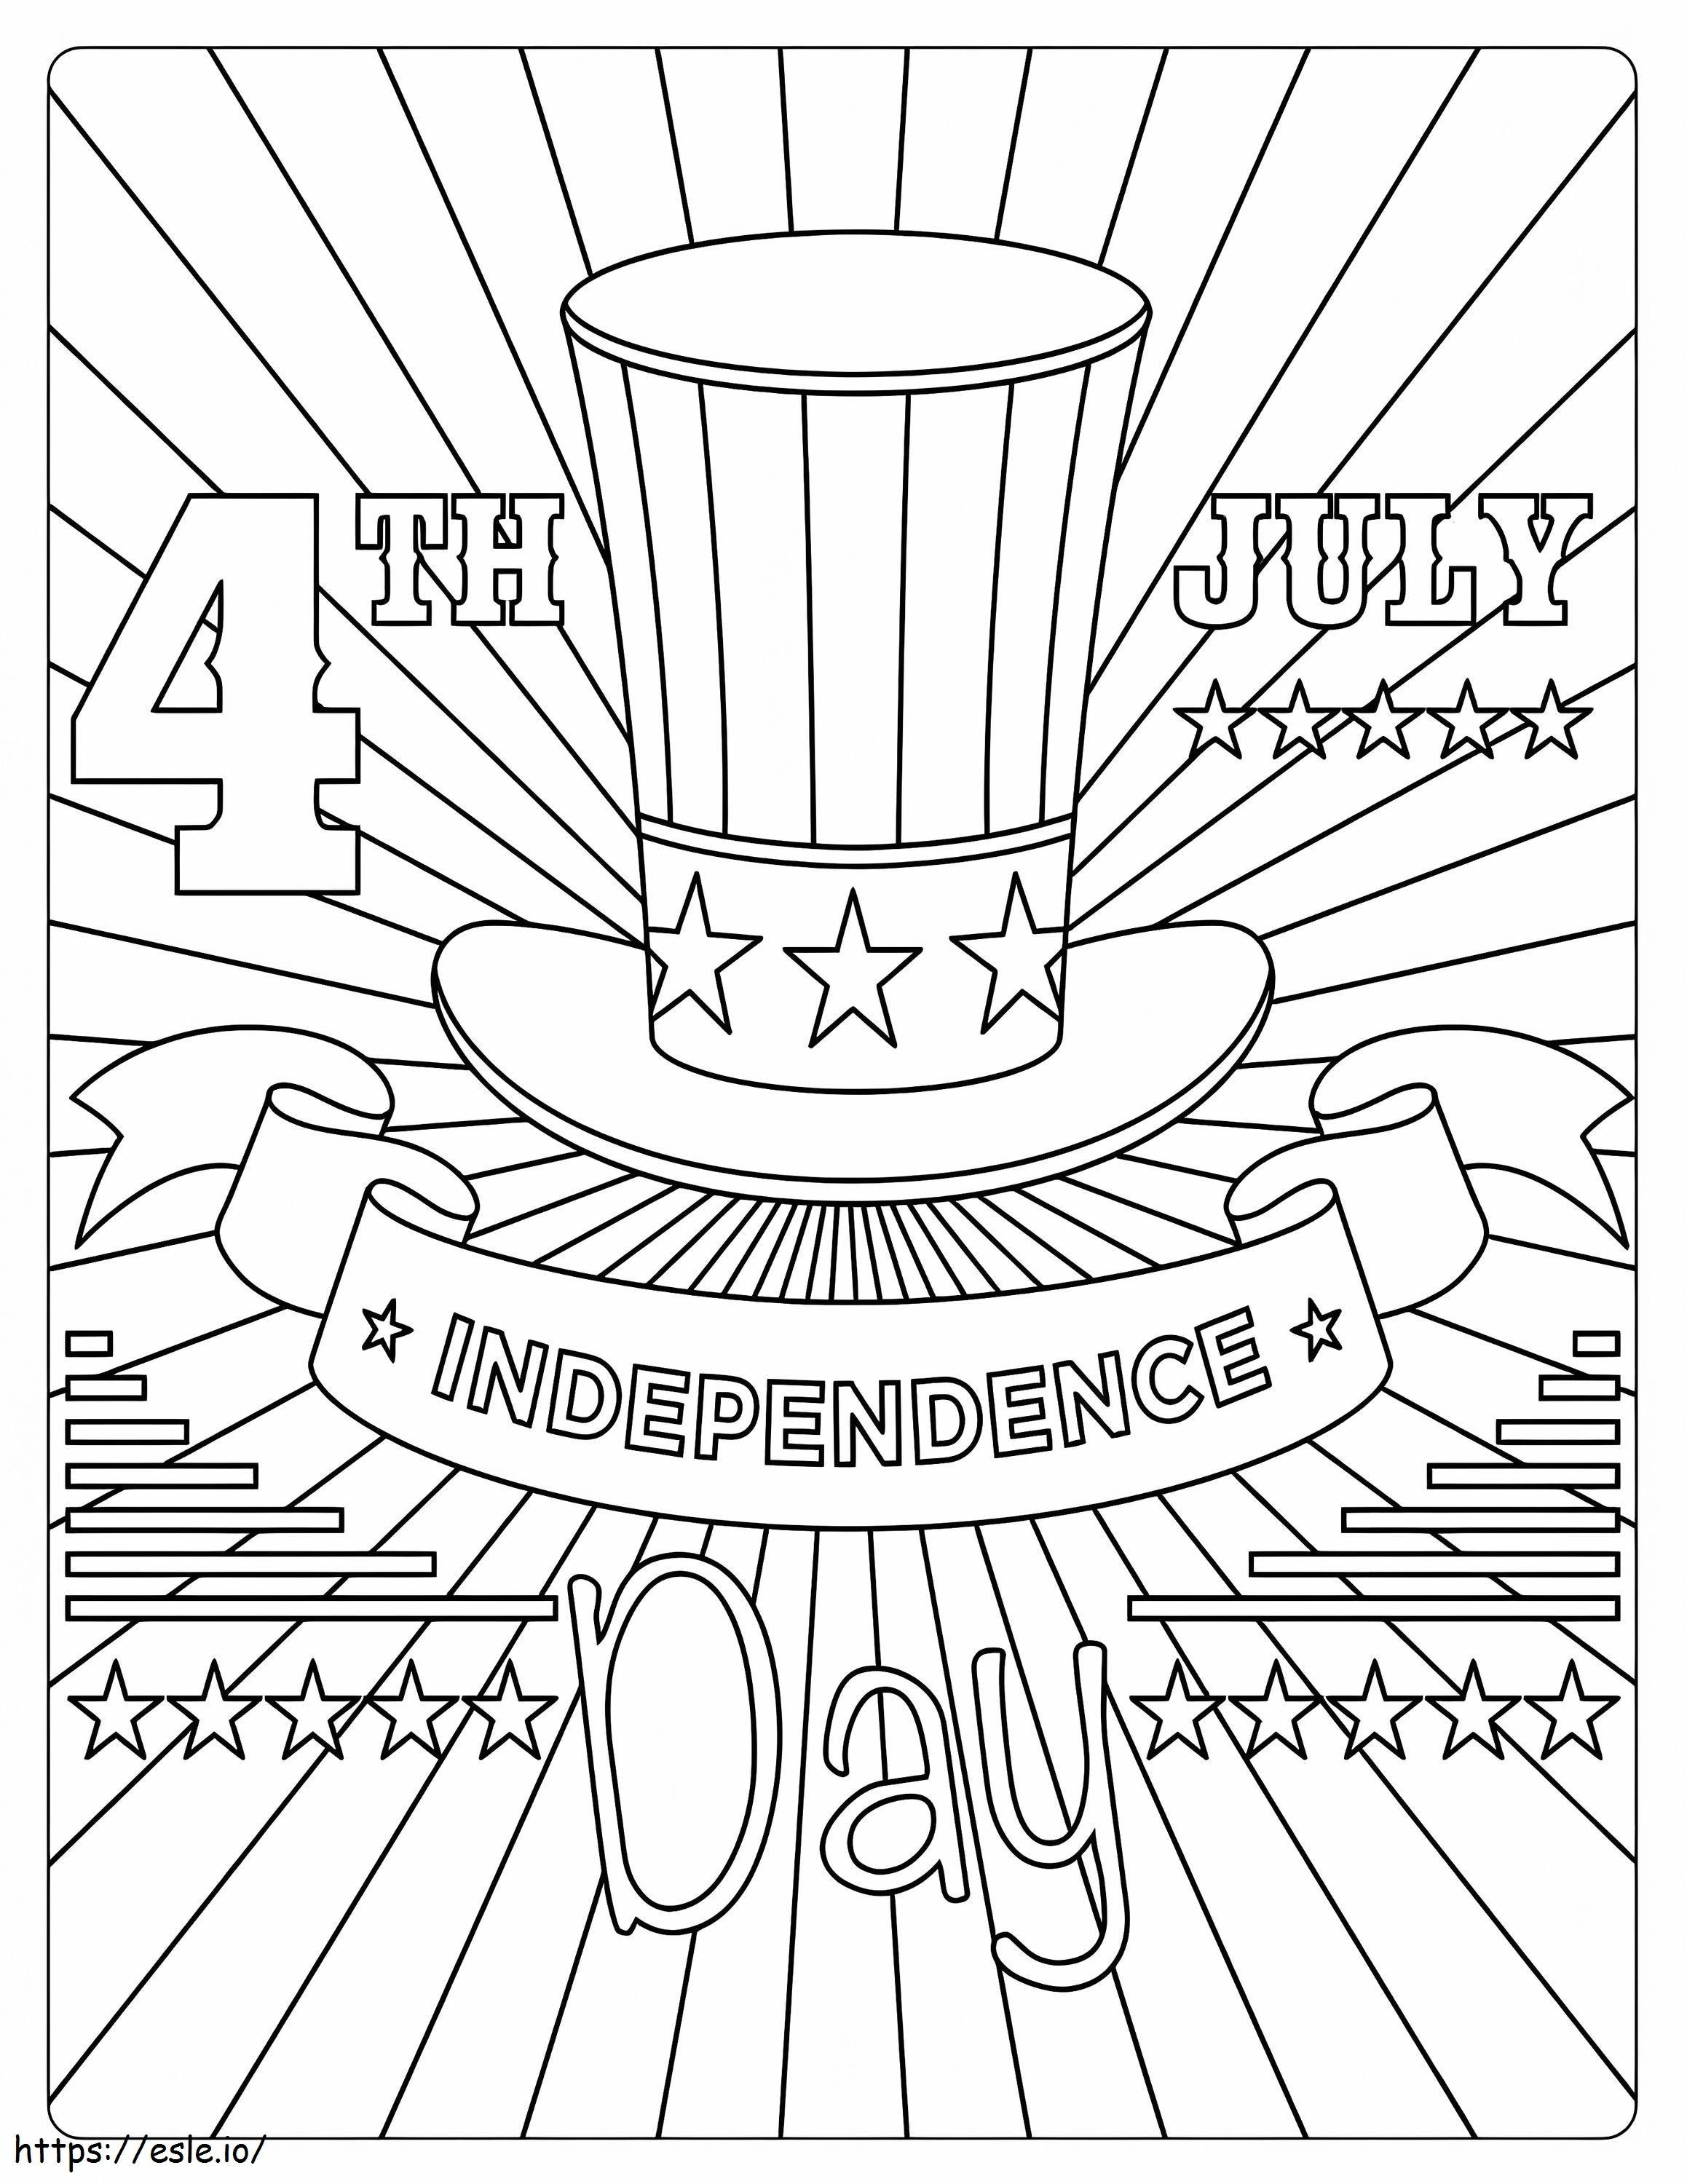 4Th Of July 1 coloring page